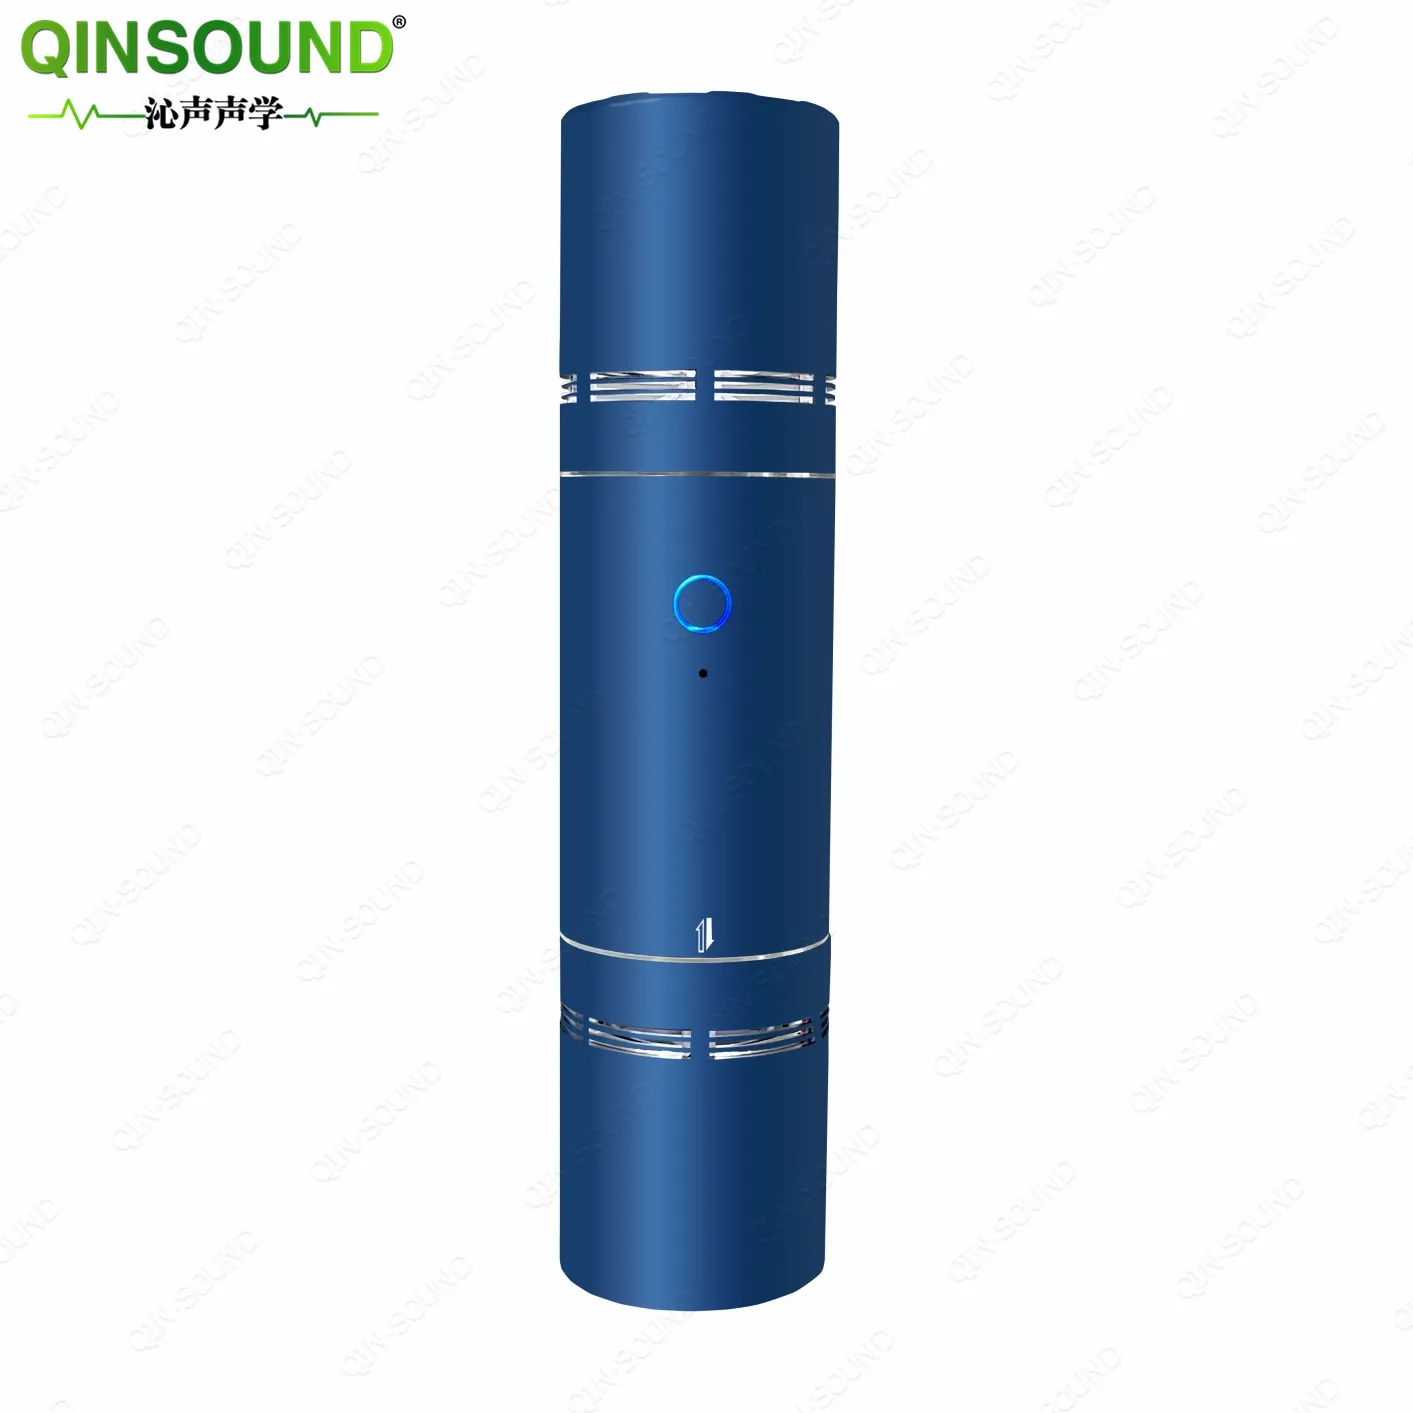 

Qinsound new arrival Multi-function mini Speaker QS101 Pro with 3 colors good quality min Portable comfortable, Blue/ grey/ pink